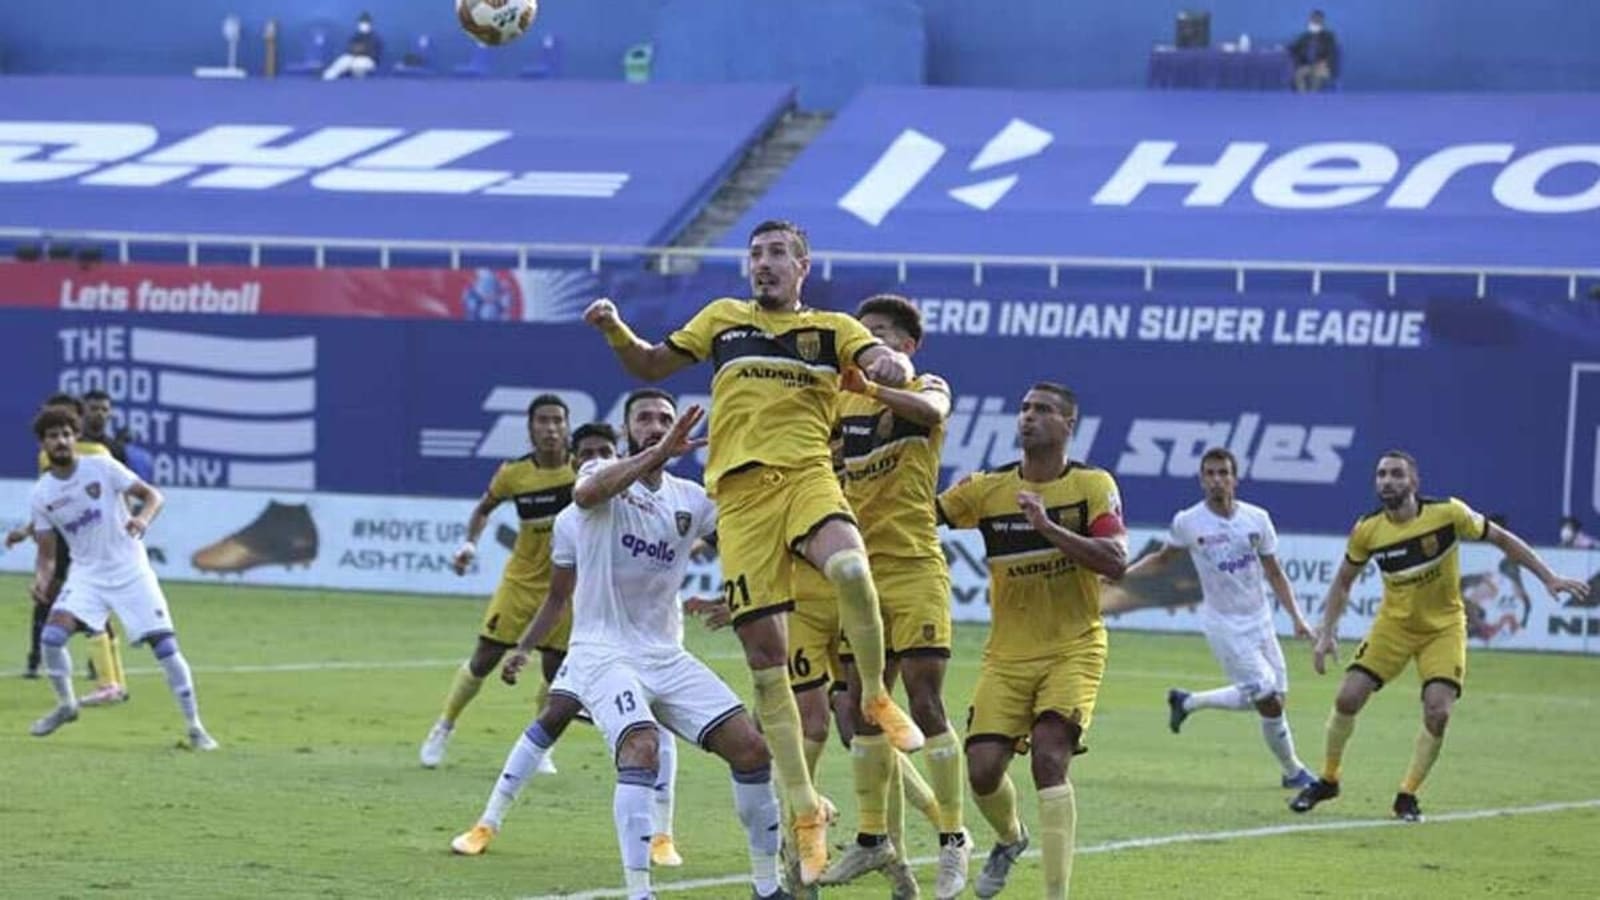 2022-23 I-League winners will be promoted to ISL: AIFF